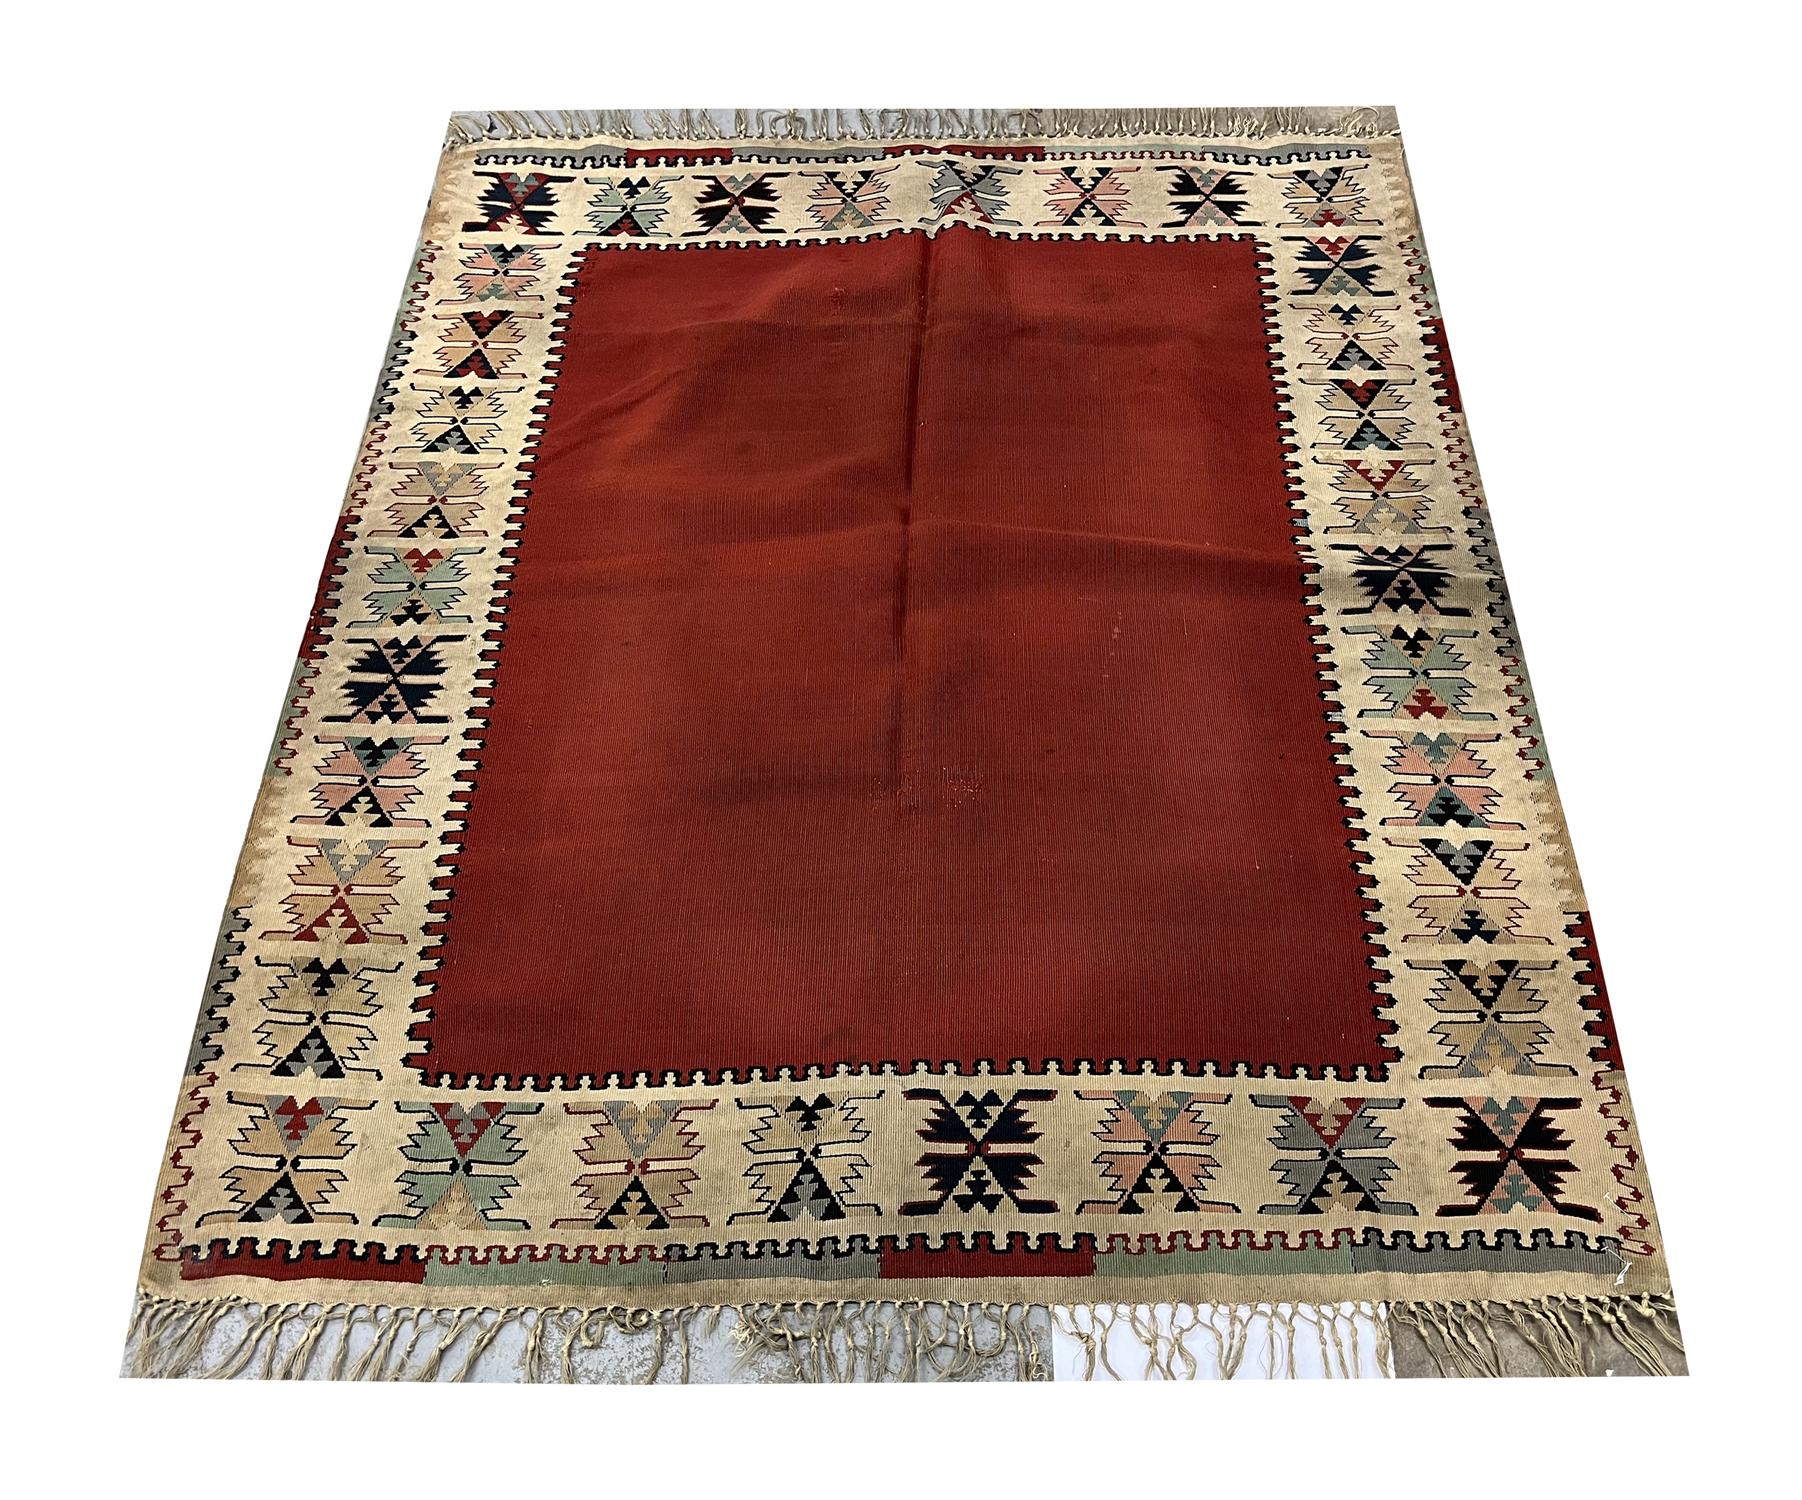 This flatwoven kilim area rug is an excellent example of kilim rugs woven in the 1920s in Anatolia, Turkey. The design is simple yet eye-catching. They featured a maroon red open field framed by a repeating pattern cream border woven with pink,